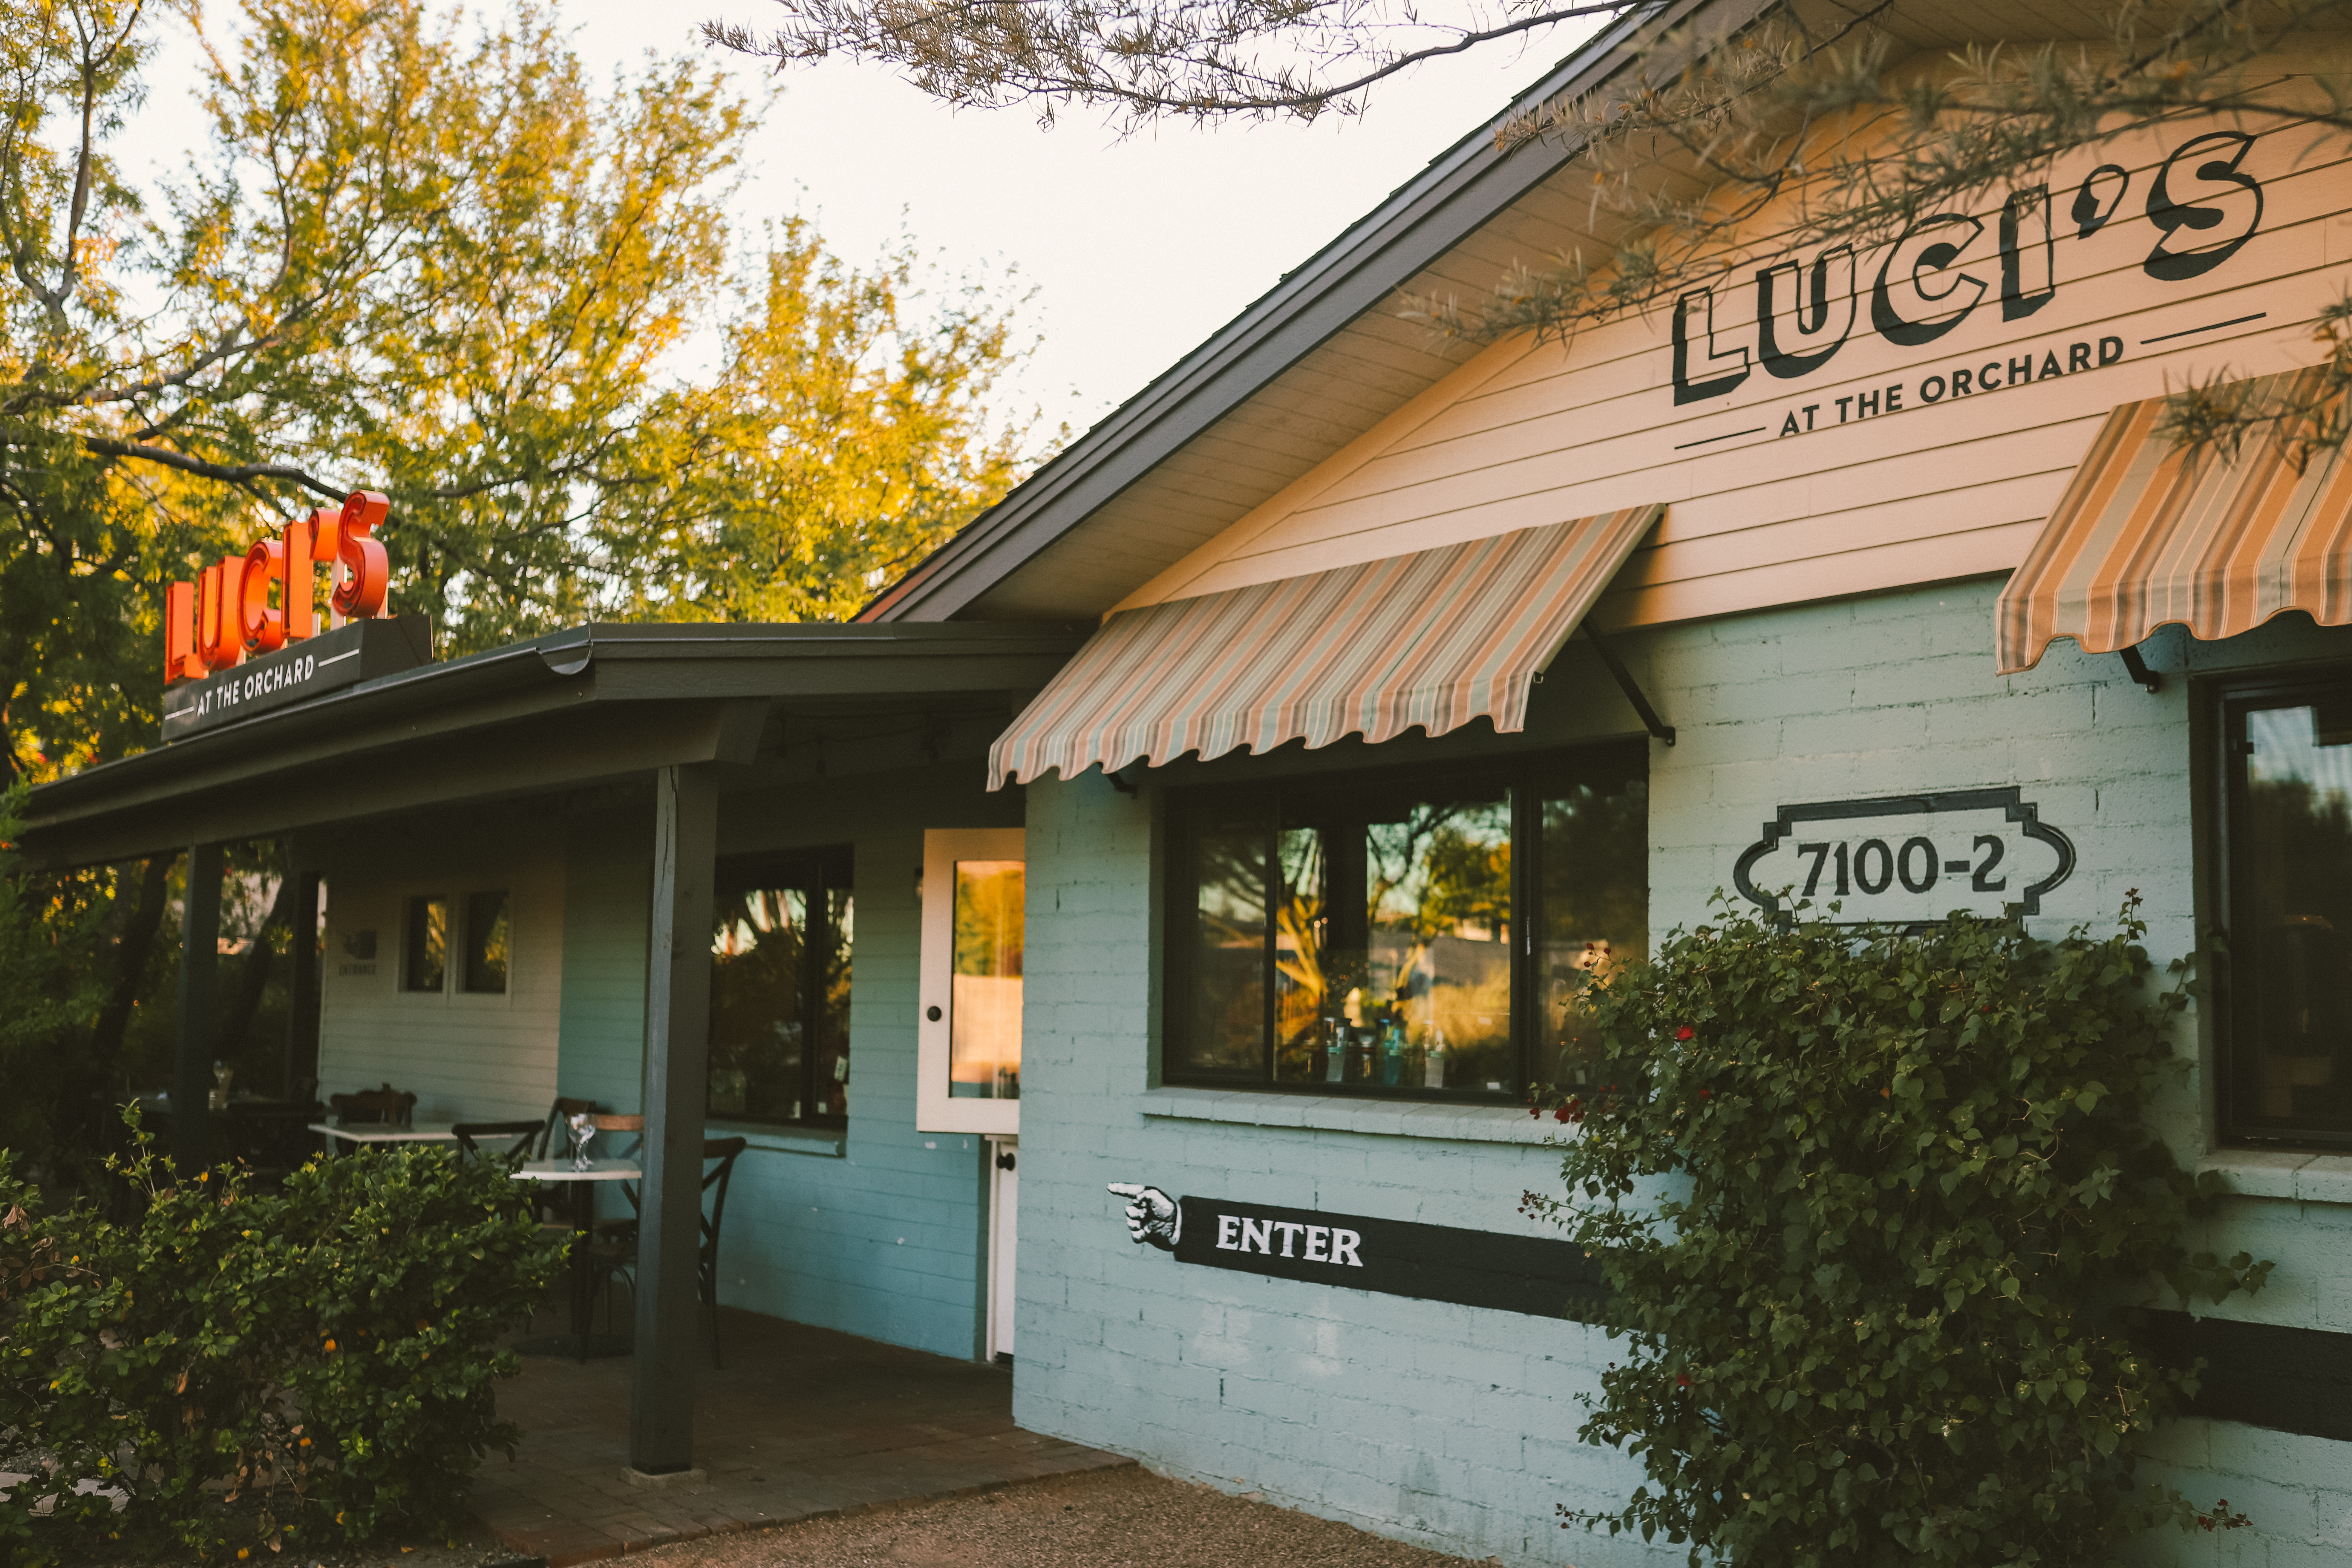 11 of the Best Places to Eat in Phoenix Arizona | Luci's at The Orchard #simplywander #phoenix #arizona #lucis